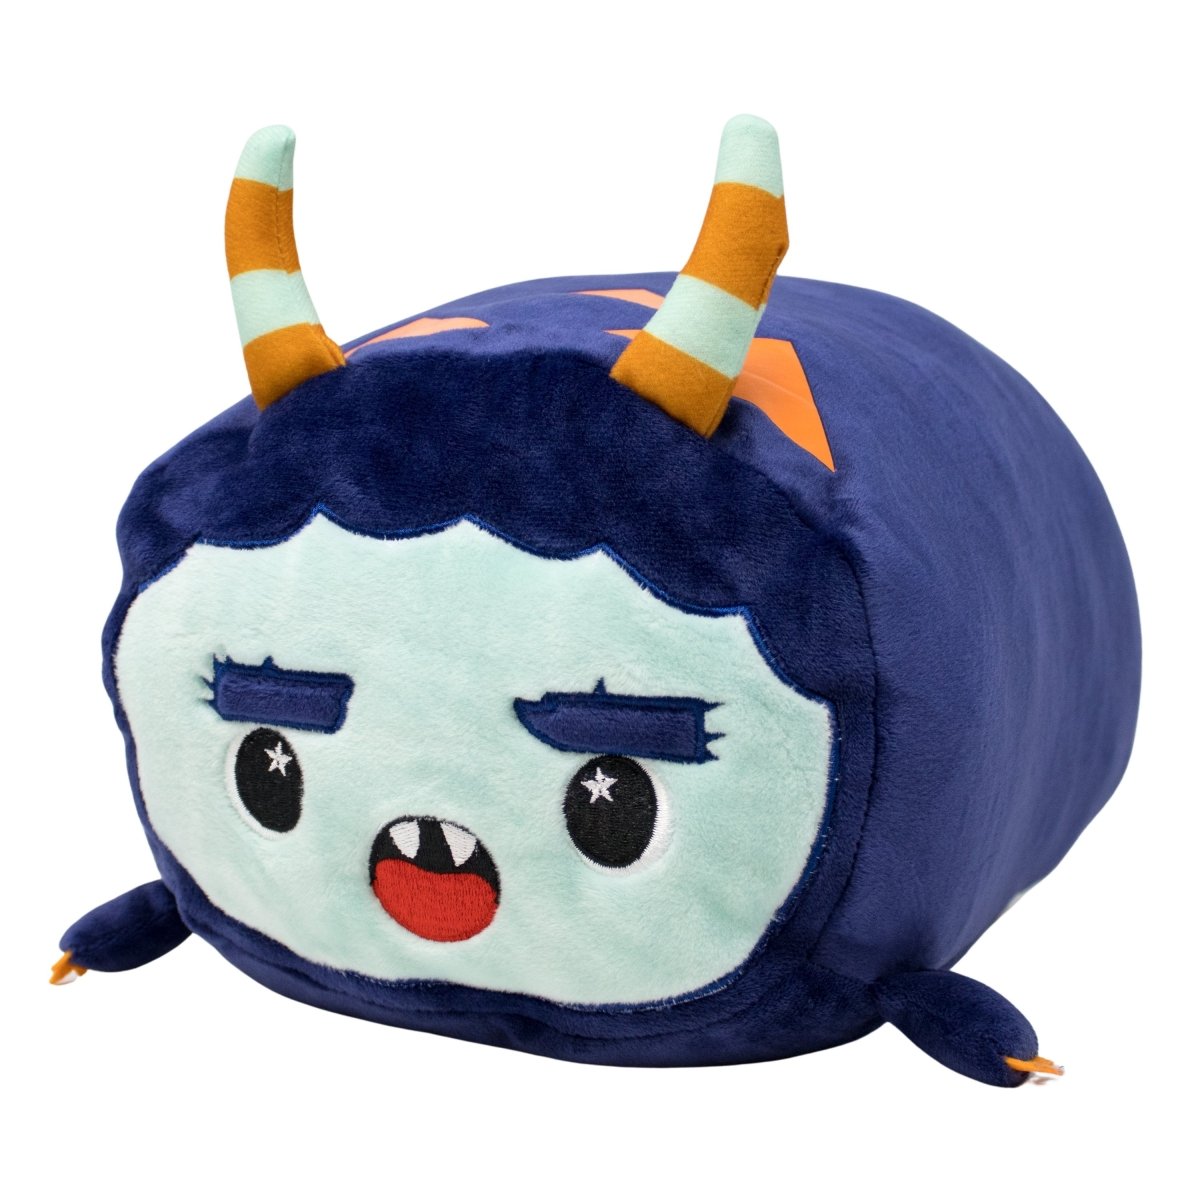 Spike the Monster Plushie